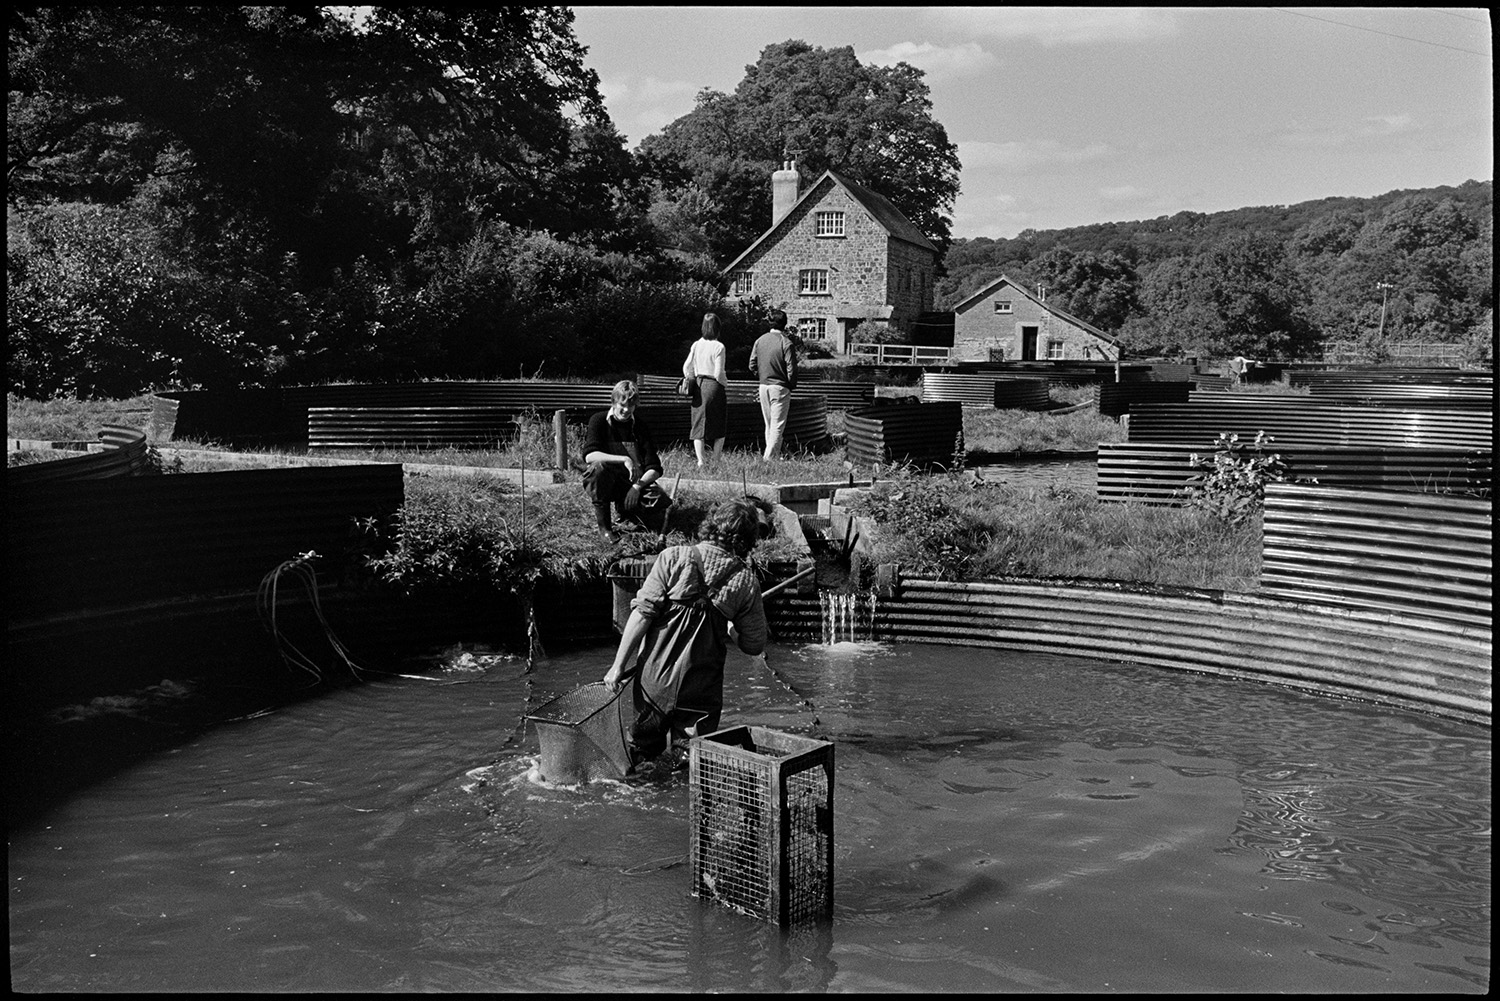 Fish farm ponds. 
[A person catching fish, using a large net, in a pond at the fish farm at head Mill, Kings Nympton. A man is watching them and two people are looking at other ponds behind them. The ponds are made from corrugated iron and the mill buildings are visible in the background.]